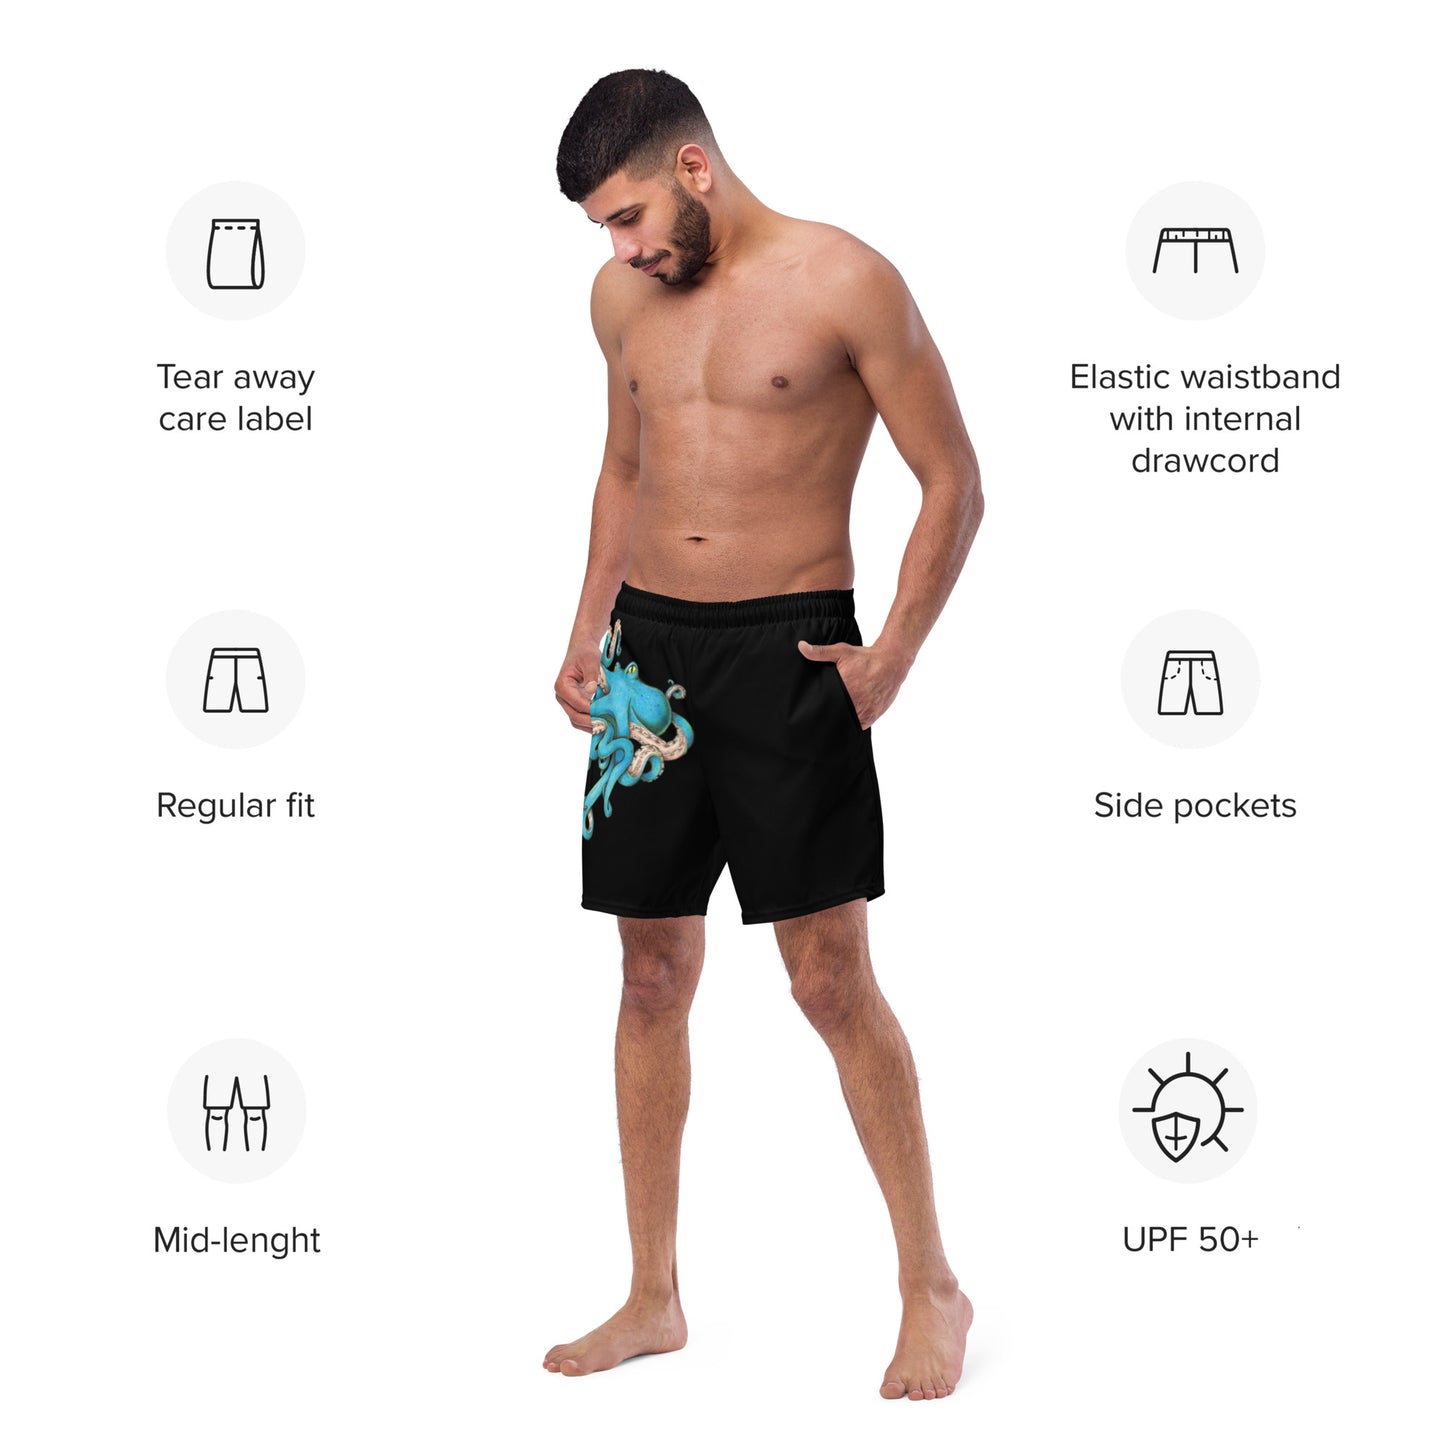 A model wears the Tangled Octopus swim trunks by Deven Rue, surrounded by product specifications.